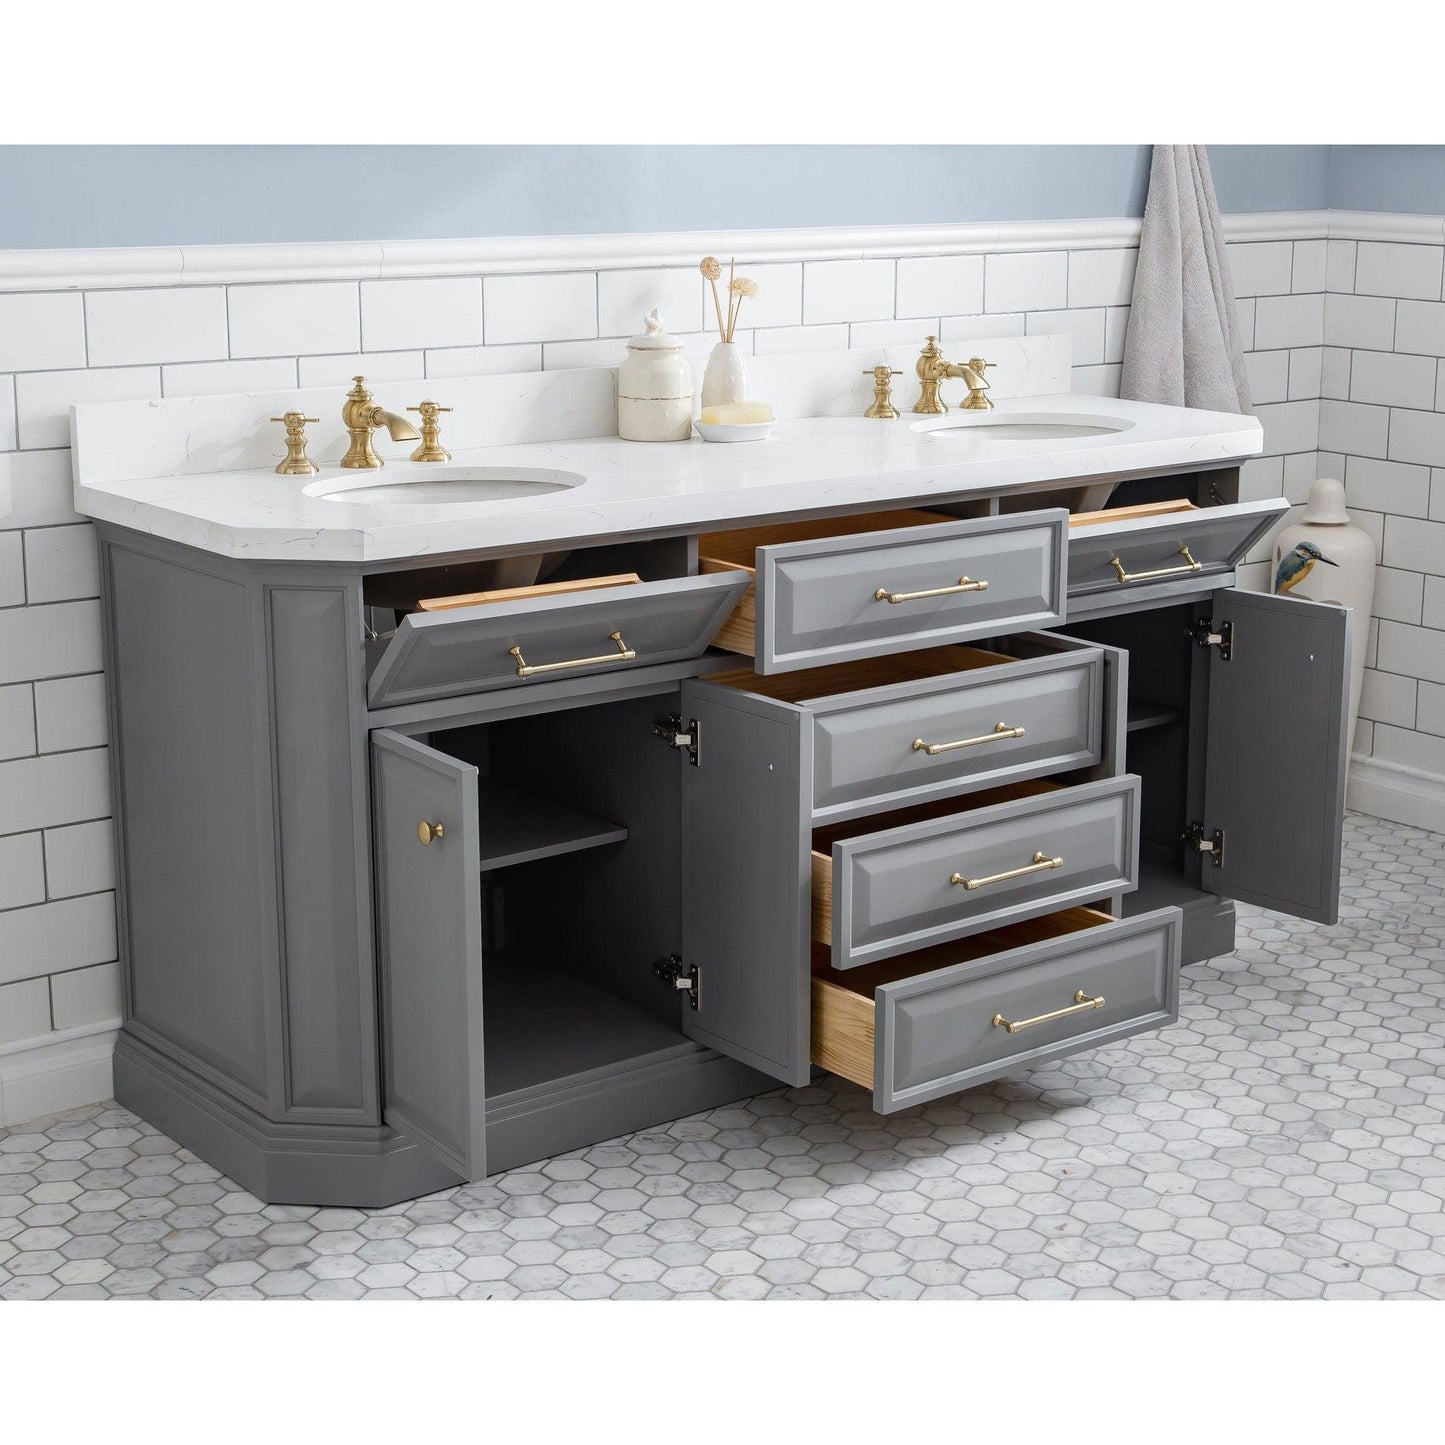 Water Creation Palace 72" Quartz Carrara Cashmere Grey Bathroom Vanity Set With Hardware in Satin Gold Finish And Mirrors in Chrome Finish